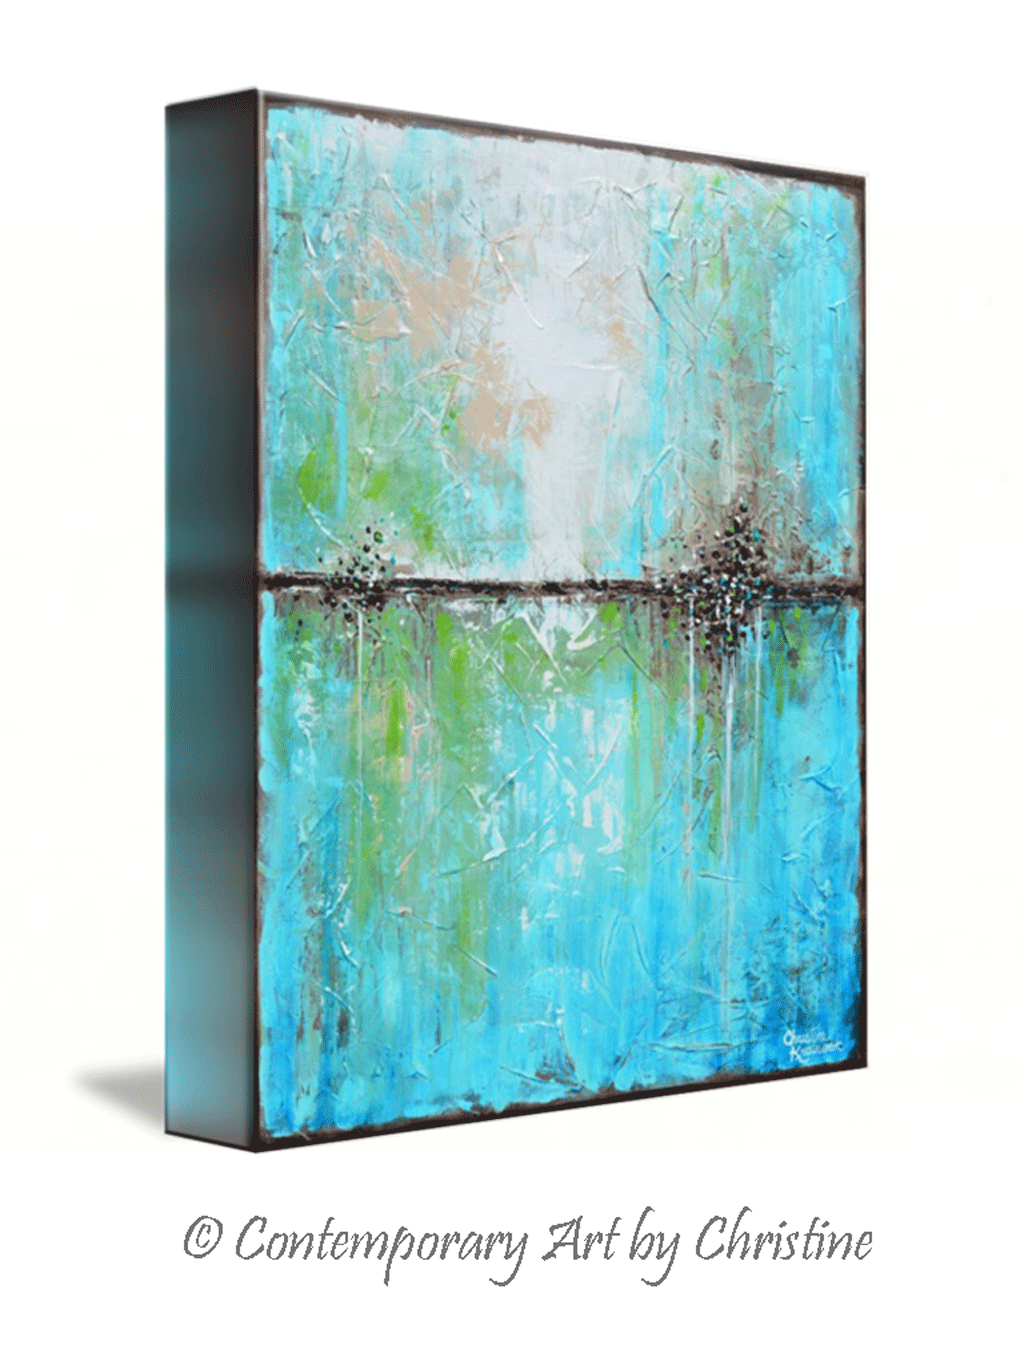 Load image into Gallery viewer, GICLEE PRINT Art Abstract Painting Aqua Blue Green White Textured Coastal Large Canvas Prints - Christine Krainock Art - Contemporary Art by Christine - 3
